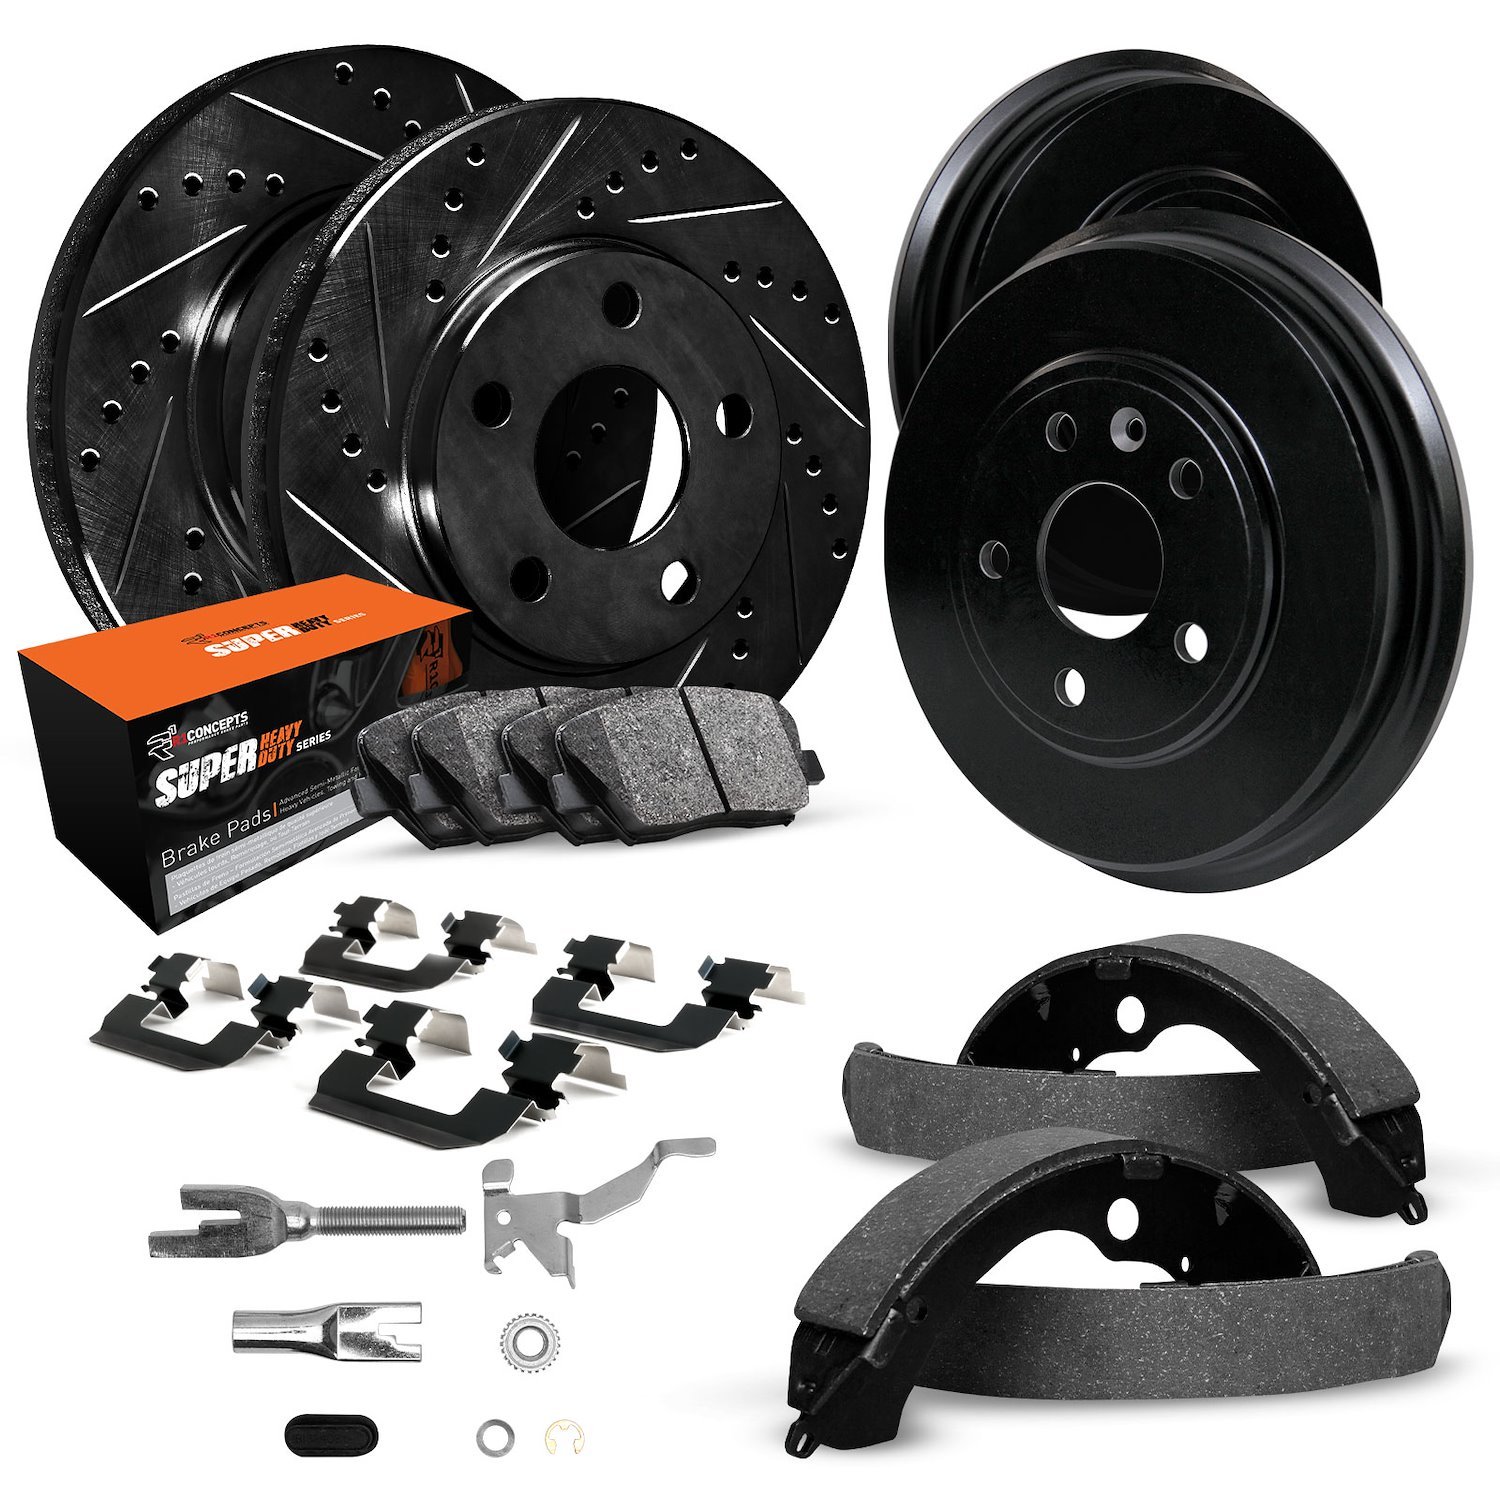 E-Line Drilled/Slotted Black Rotor & Drum Set w/Super-Duty Pads, Shoes, Hardware/Adjusters, 1971-1976 GM